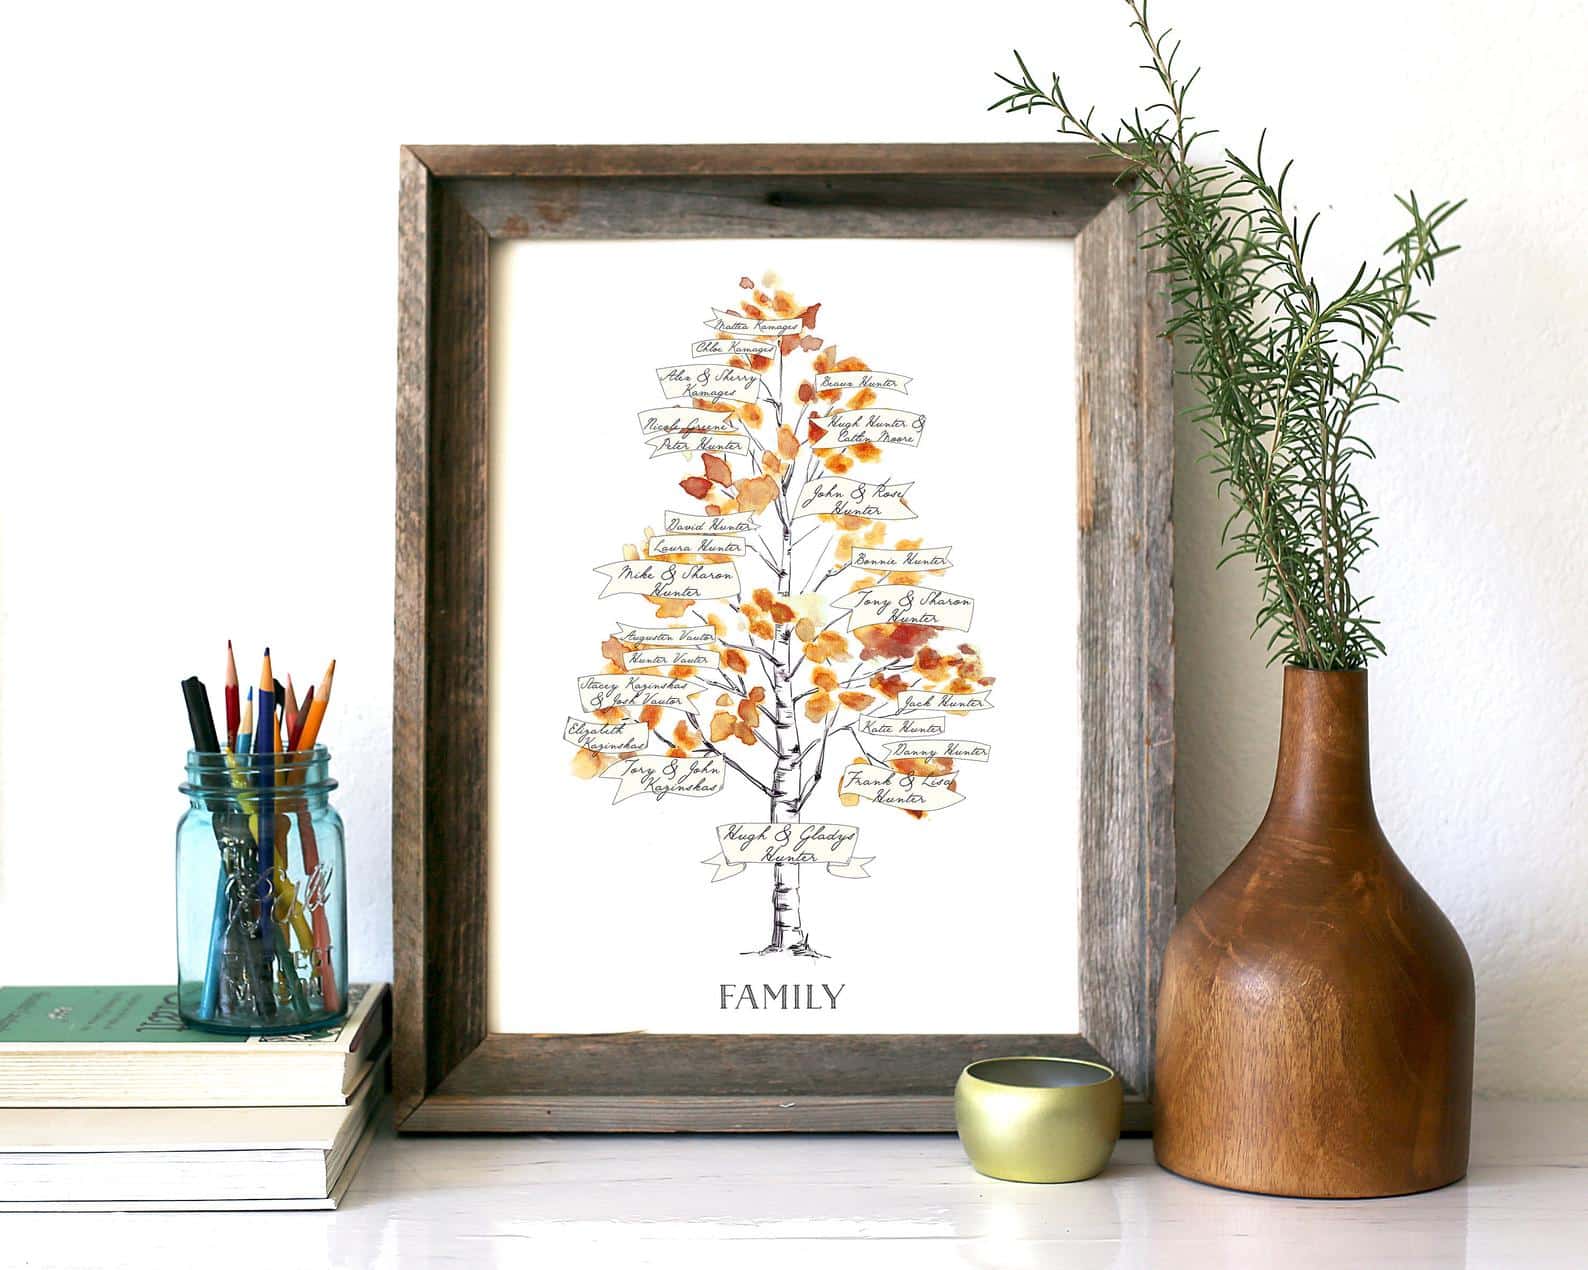 MuralMax Couples Personalized Tree Canvas Wall Art - Gifts For Parents,  Grandparents, Friends - Milestone Occasions, Bridal Showers, Wedding  Anniversary, Housewarming - Color Beige # 1 - Size 11x14 - Walmart.com